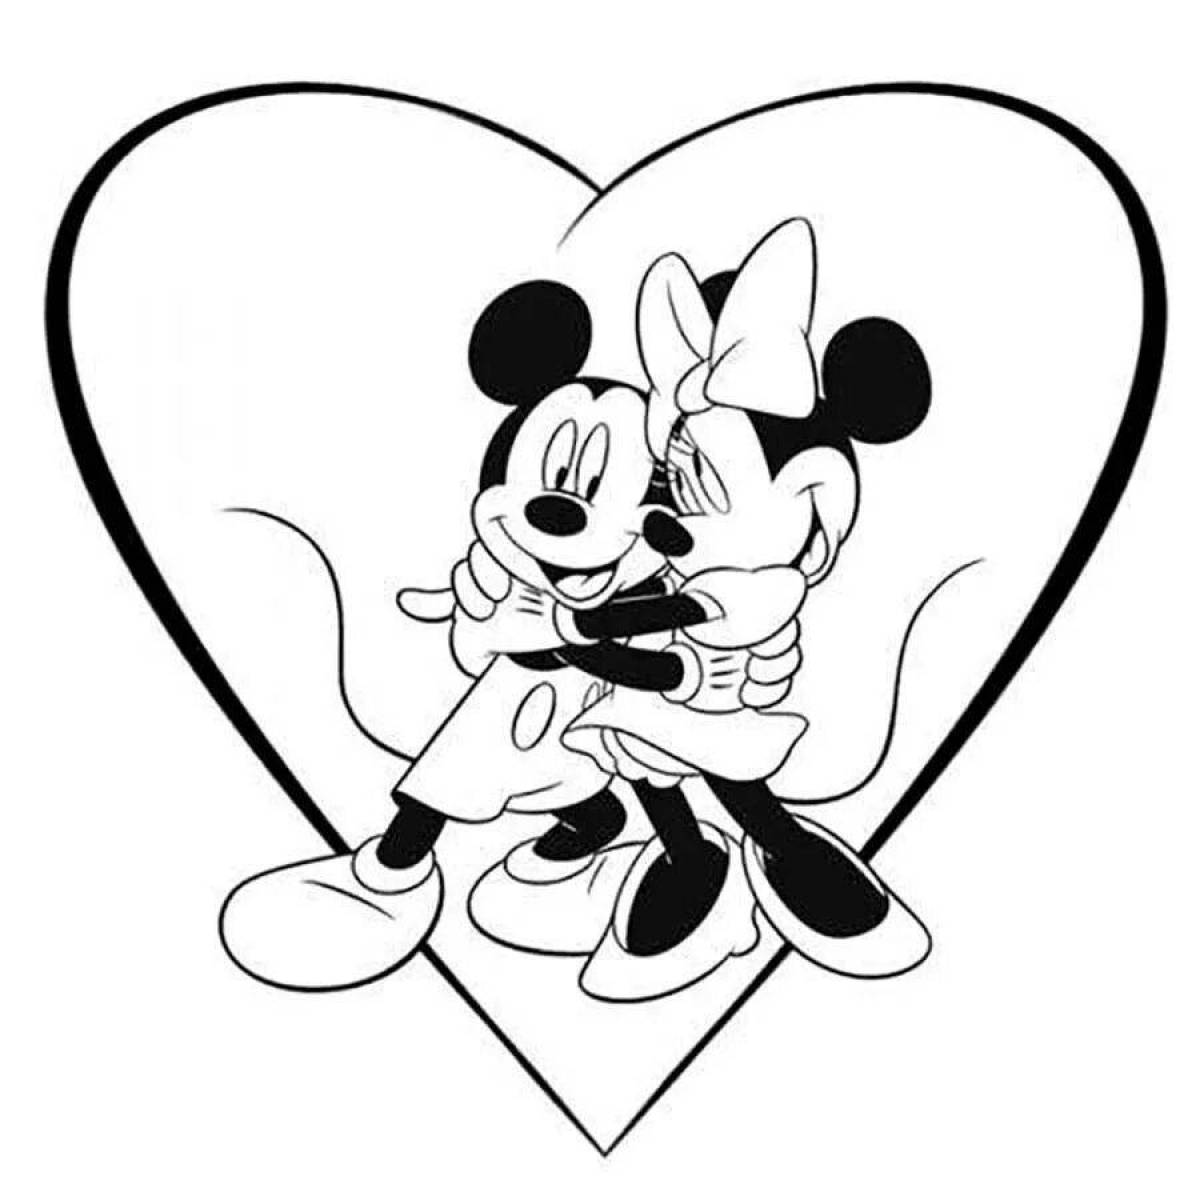 Mickey mouse and minnie mouse wild coloring